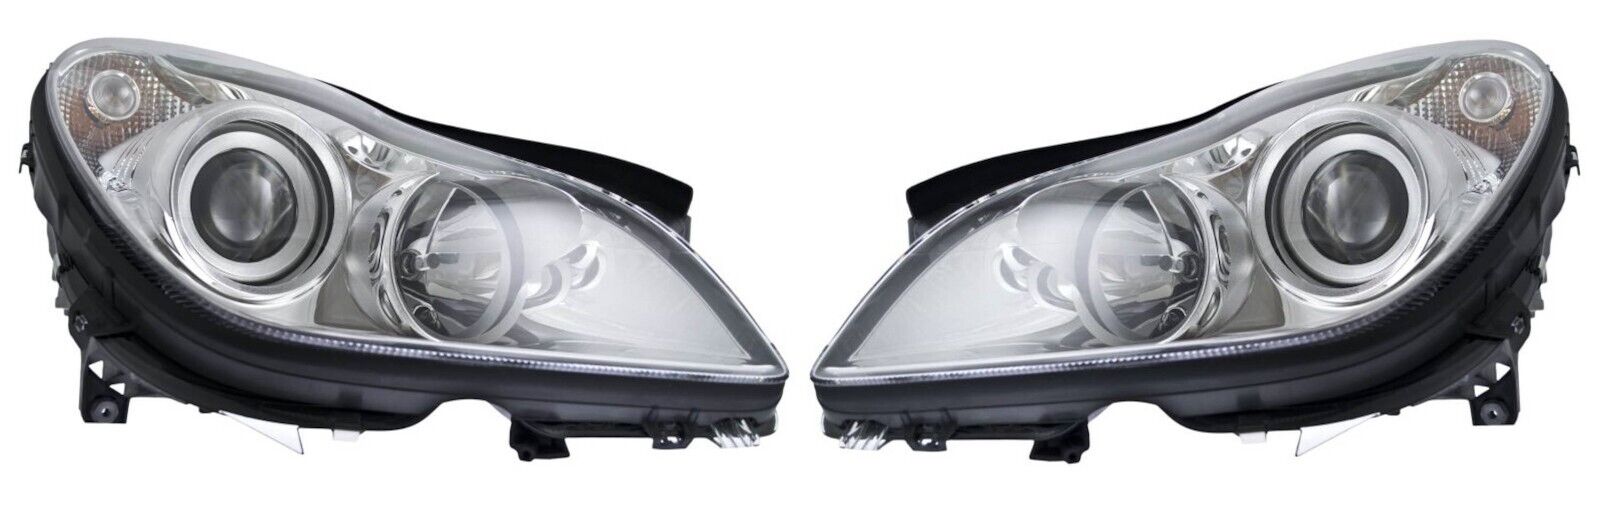 Hella Set of Left & Right Headlight Assemblies For Mercedes W219 CLS500 CLS550